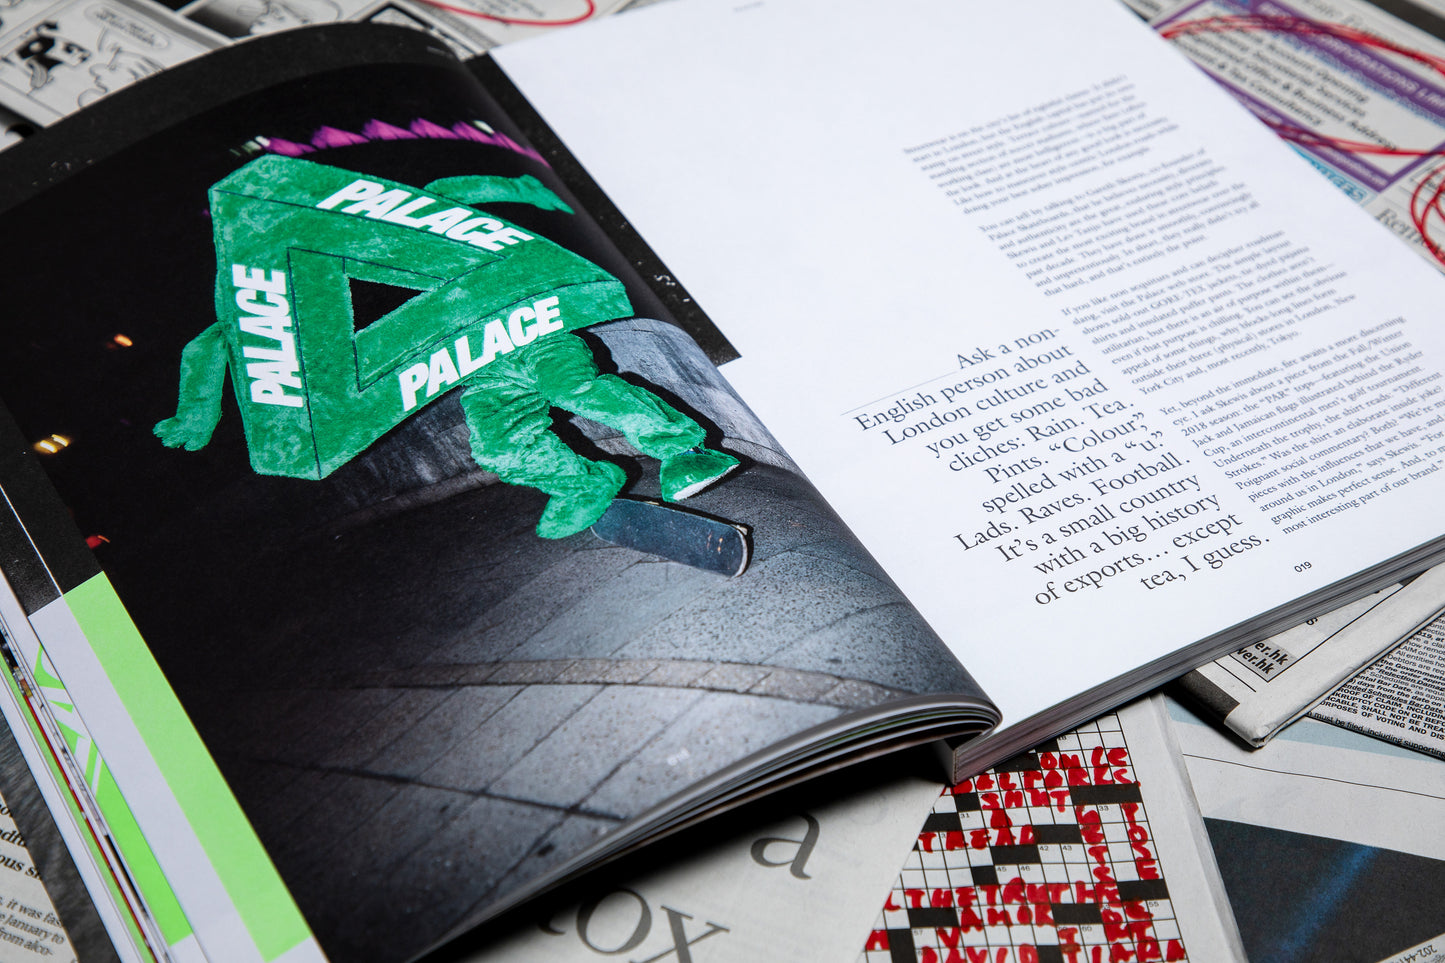 Hypebeast Magazine Issue 24: The Agency Issue